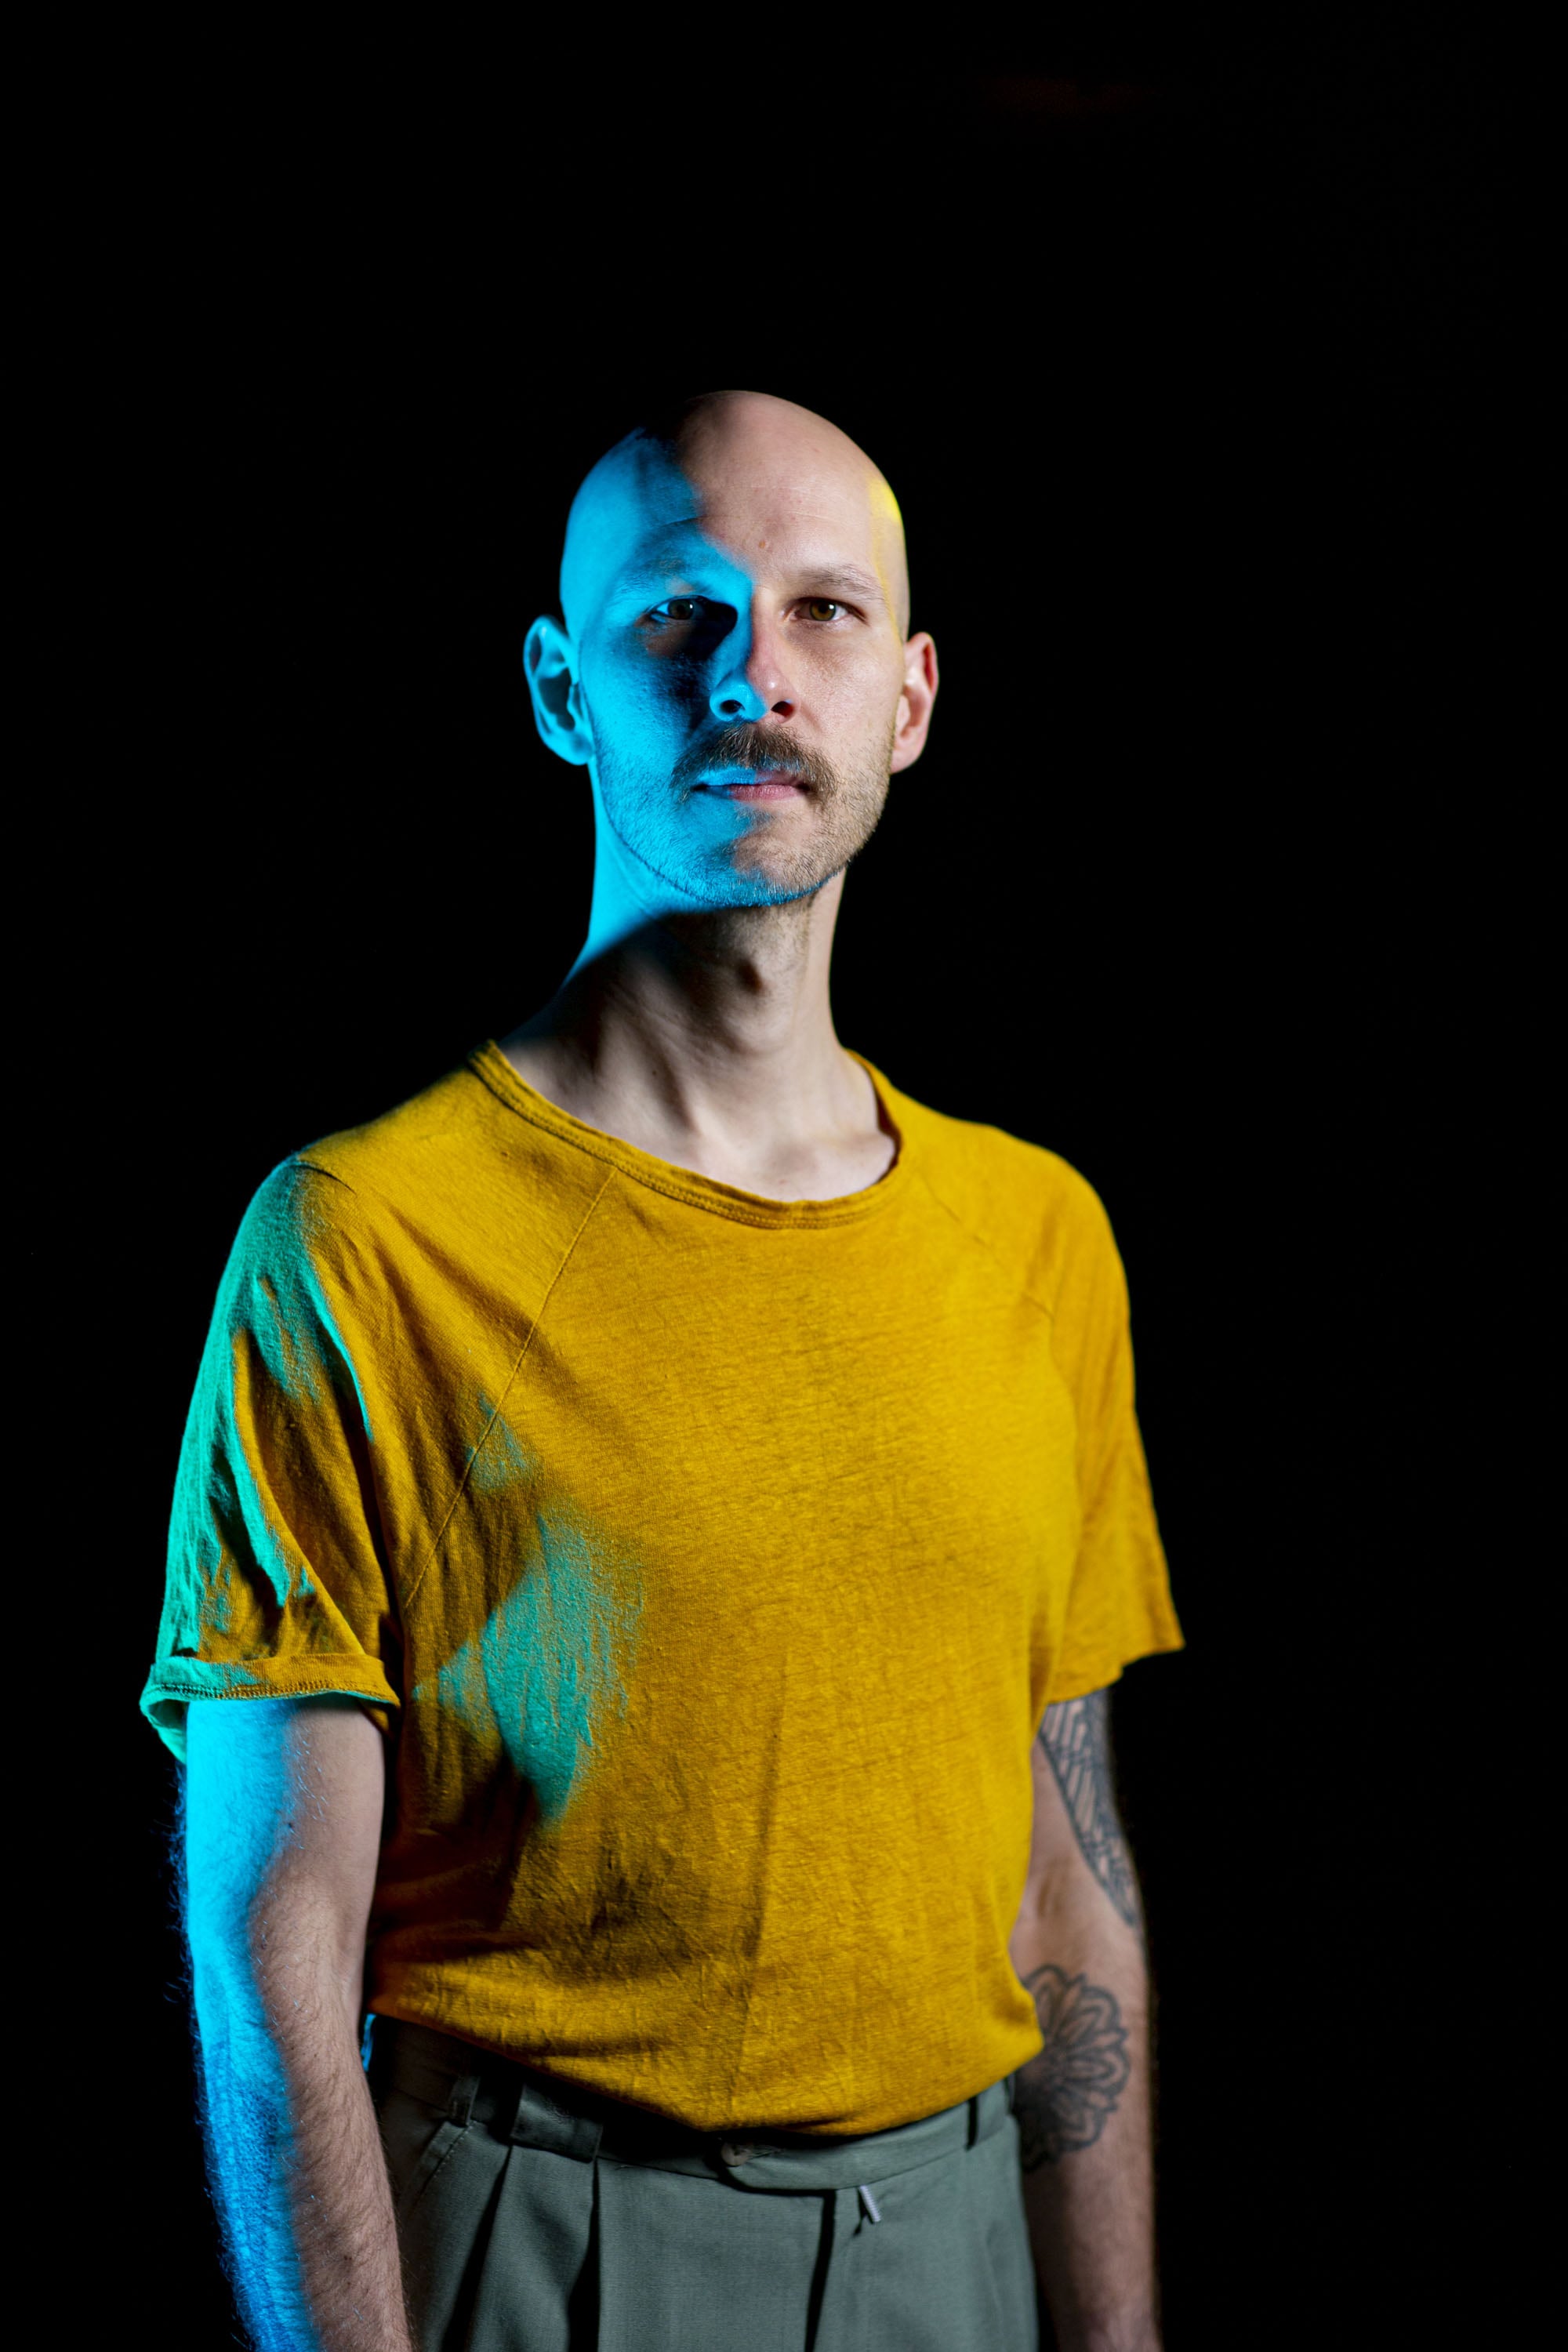 Studio Portrait of Timm Roller, wearing a yellow shirt in blue light.